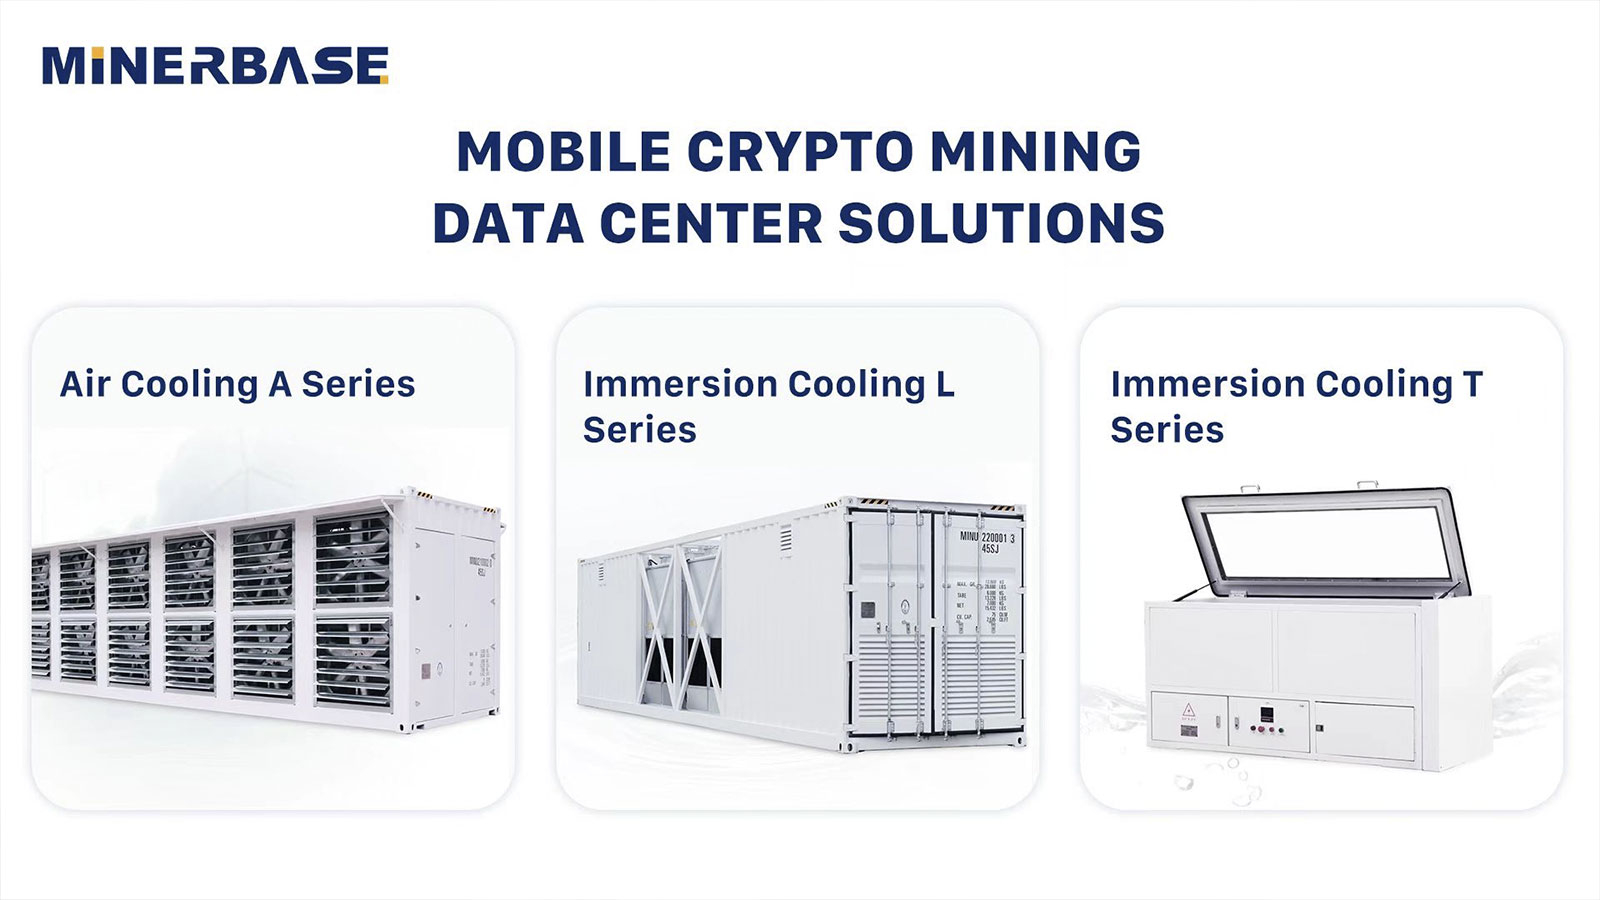 Minerbase Launches Revolutionary Cryptocurrency Mining Solution for Intelligent Management